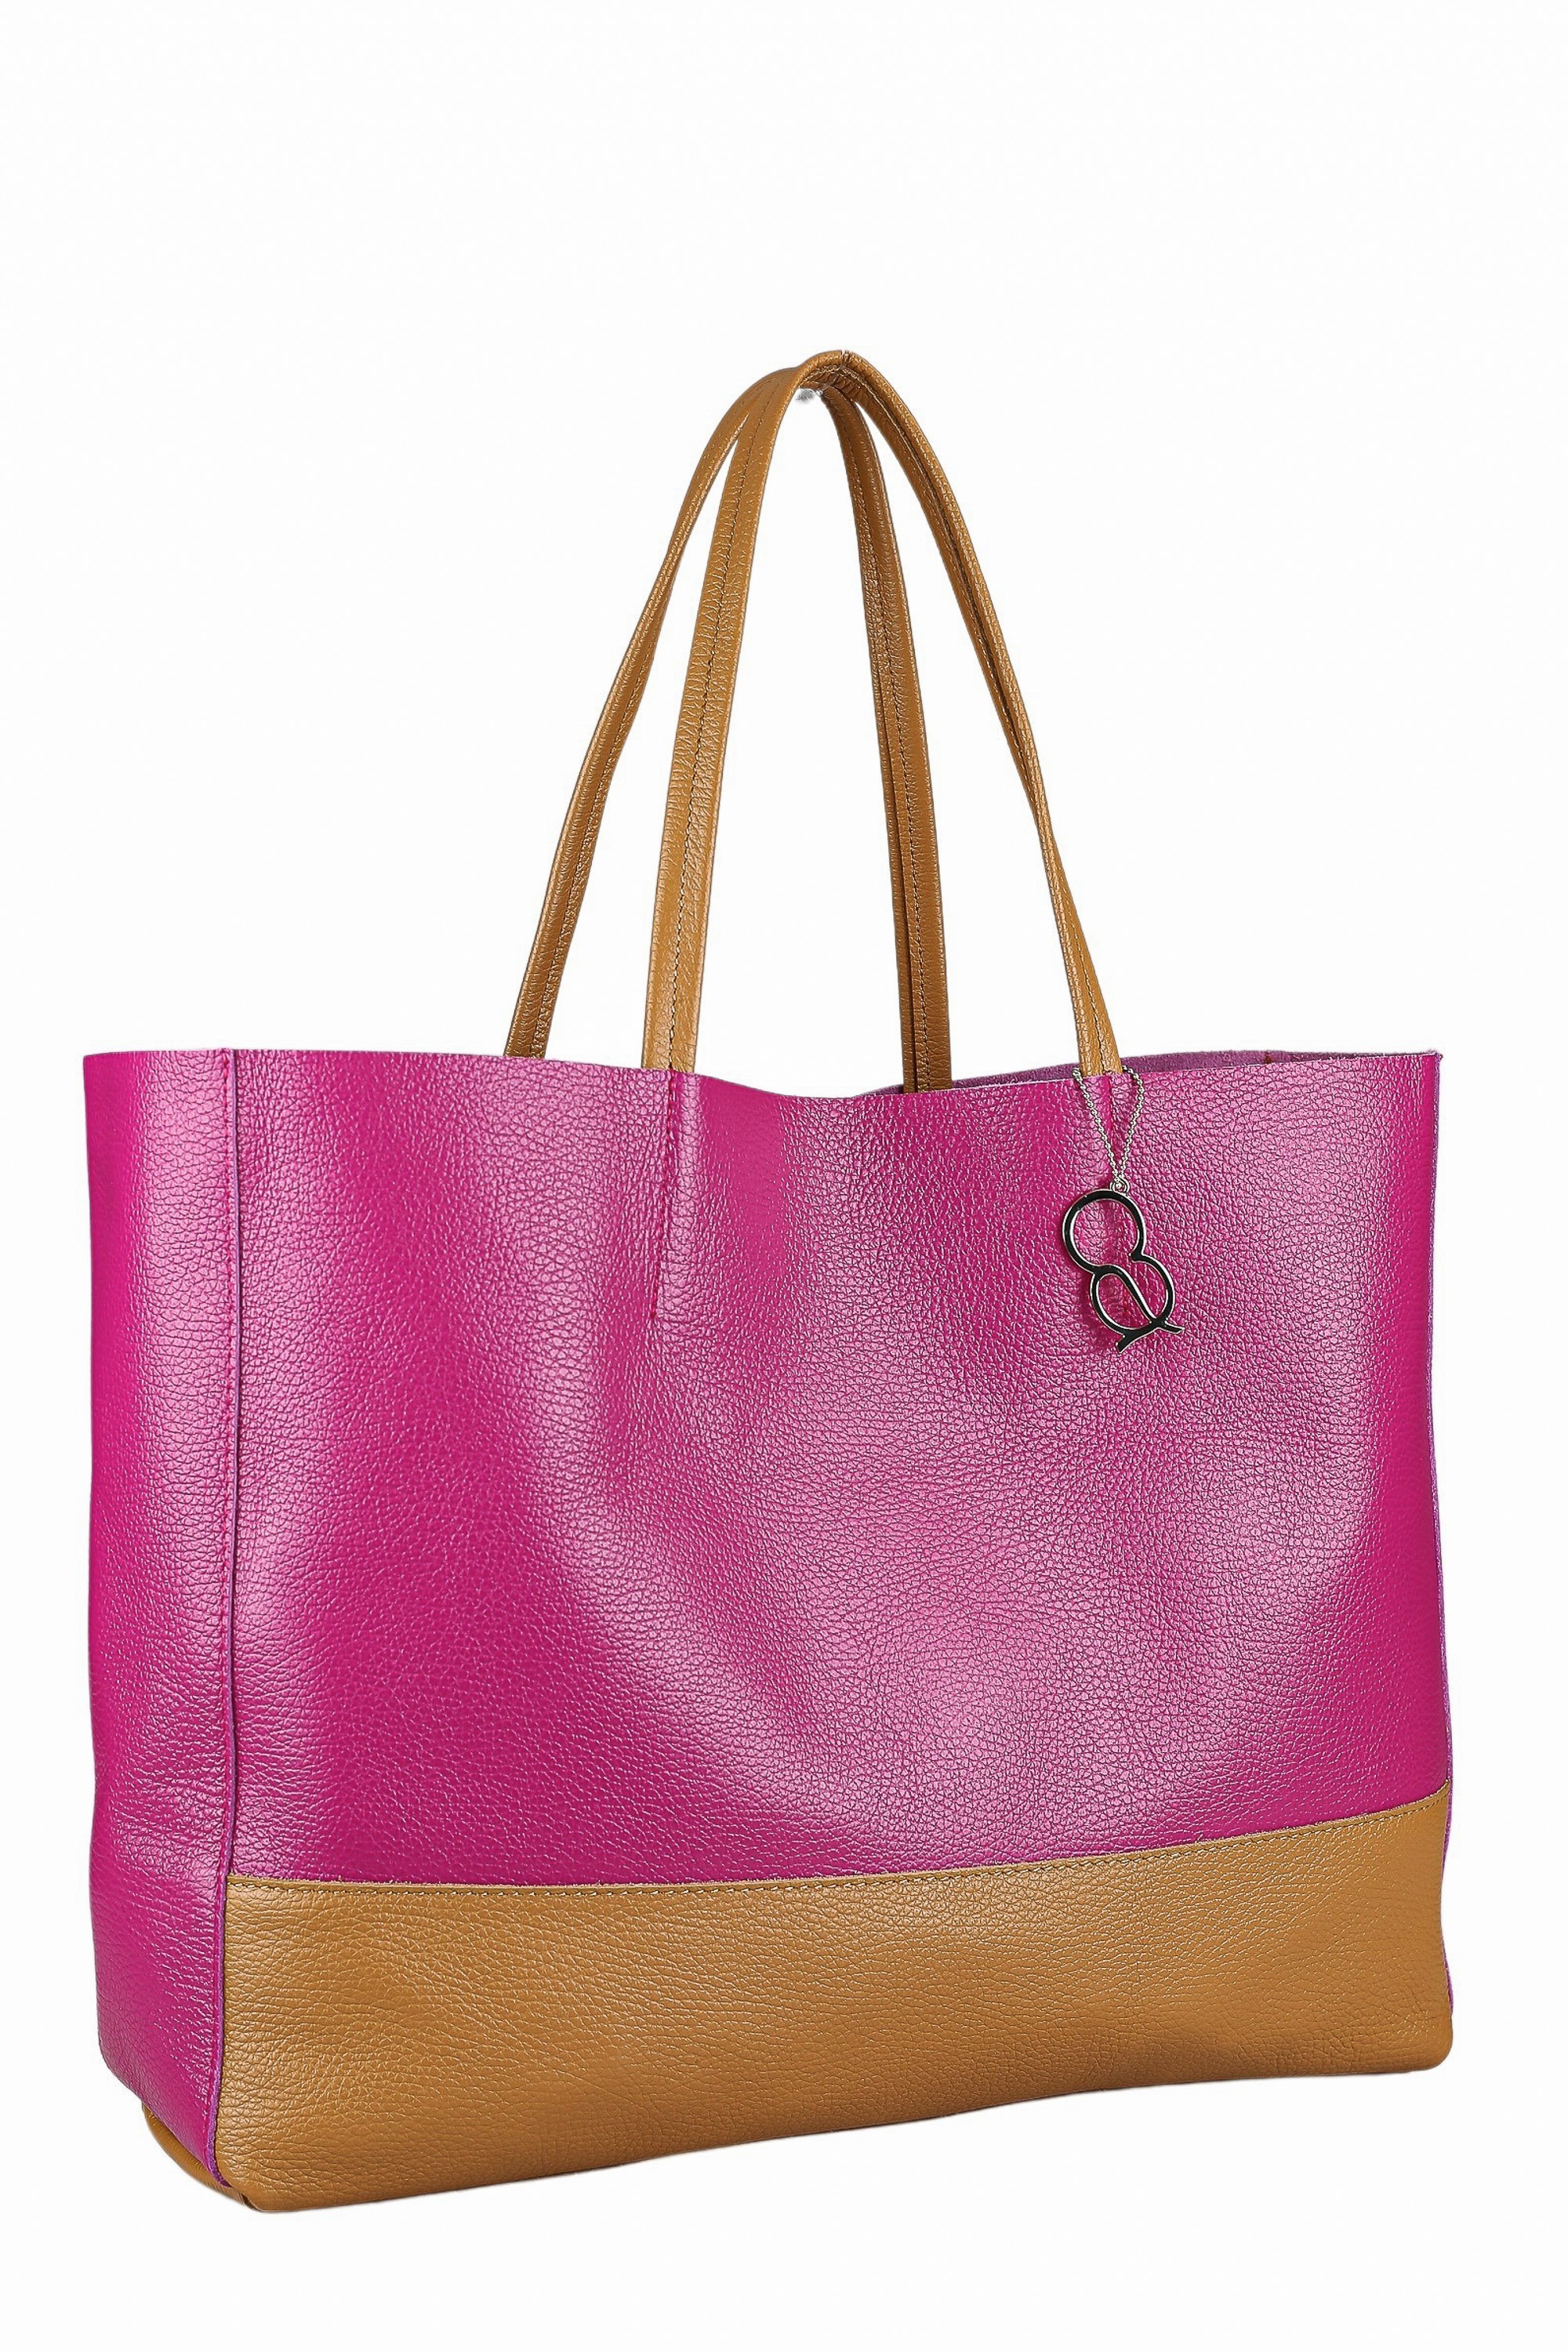 COLLEZIONE ALESSANDRO Schultertasche "Barb", Echt Leder, Made in Italy